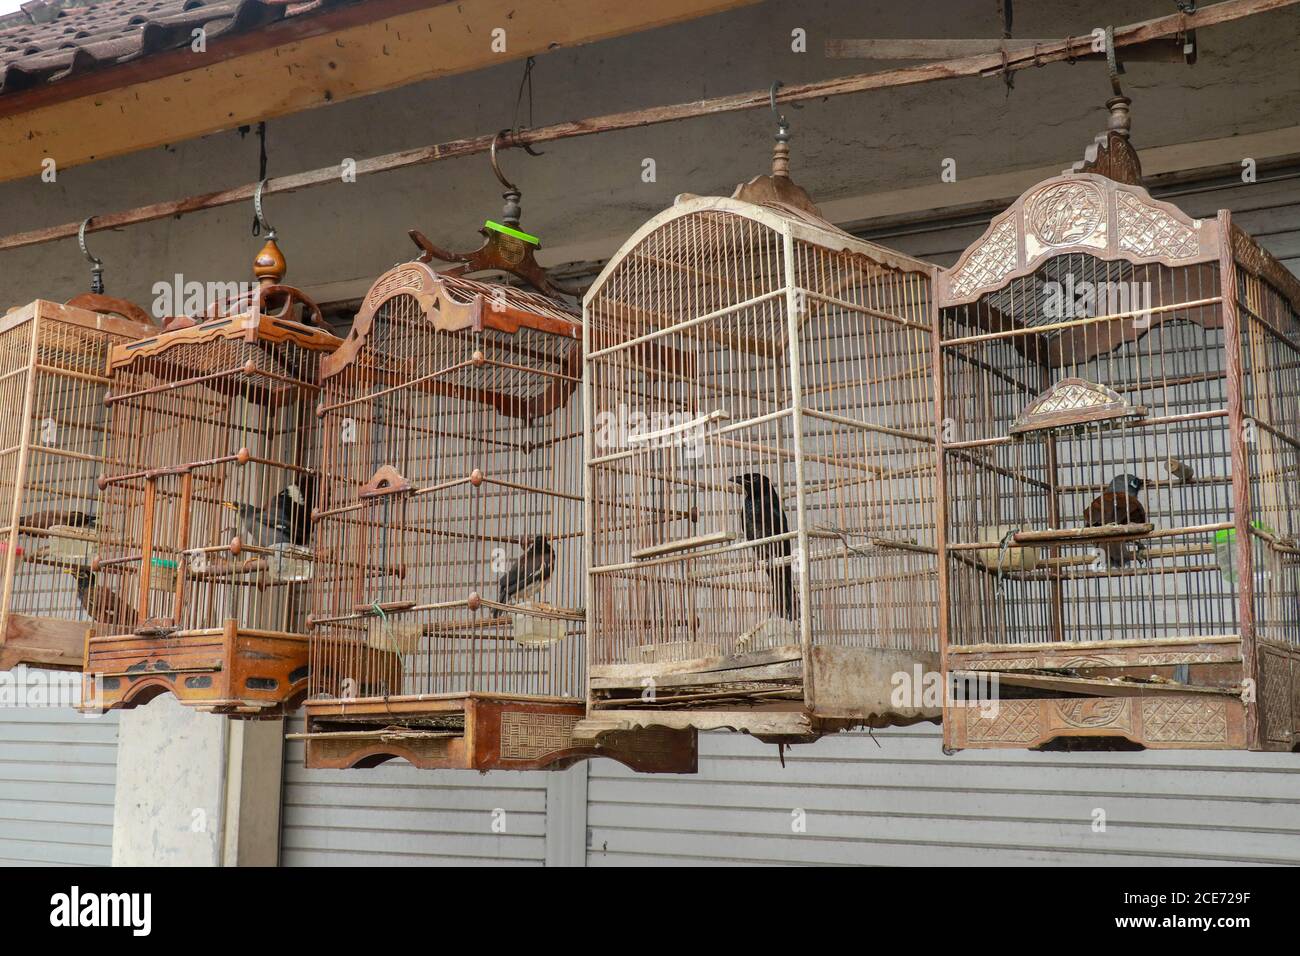 Bird cages for sale in the market, Bali, Indonesia Stock Photo - Alamy